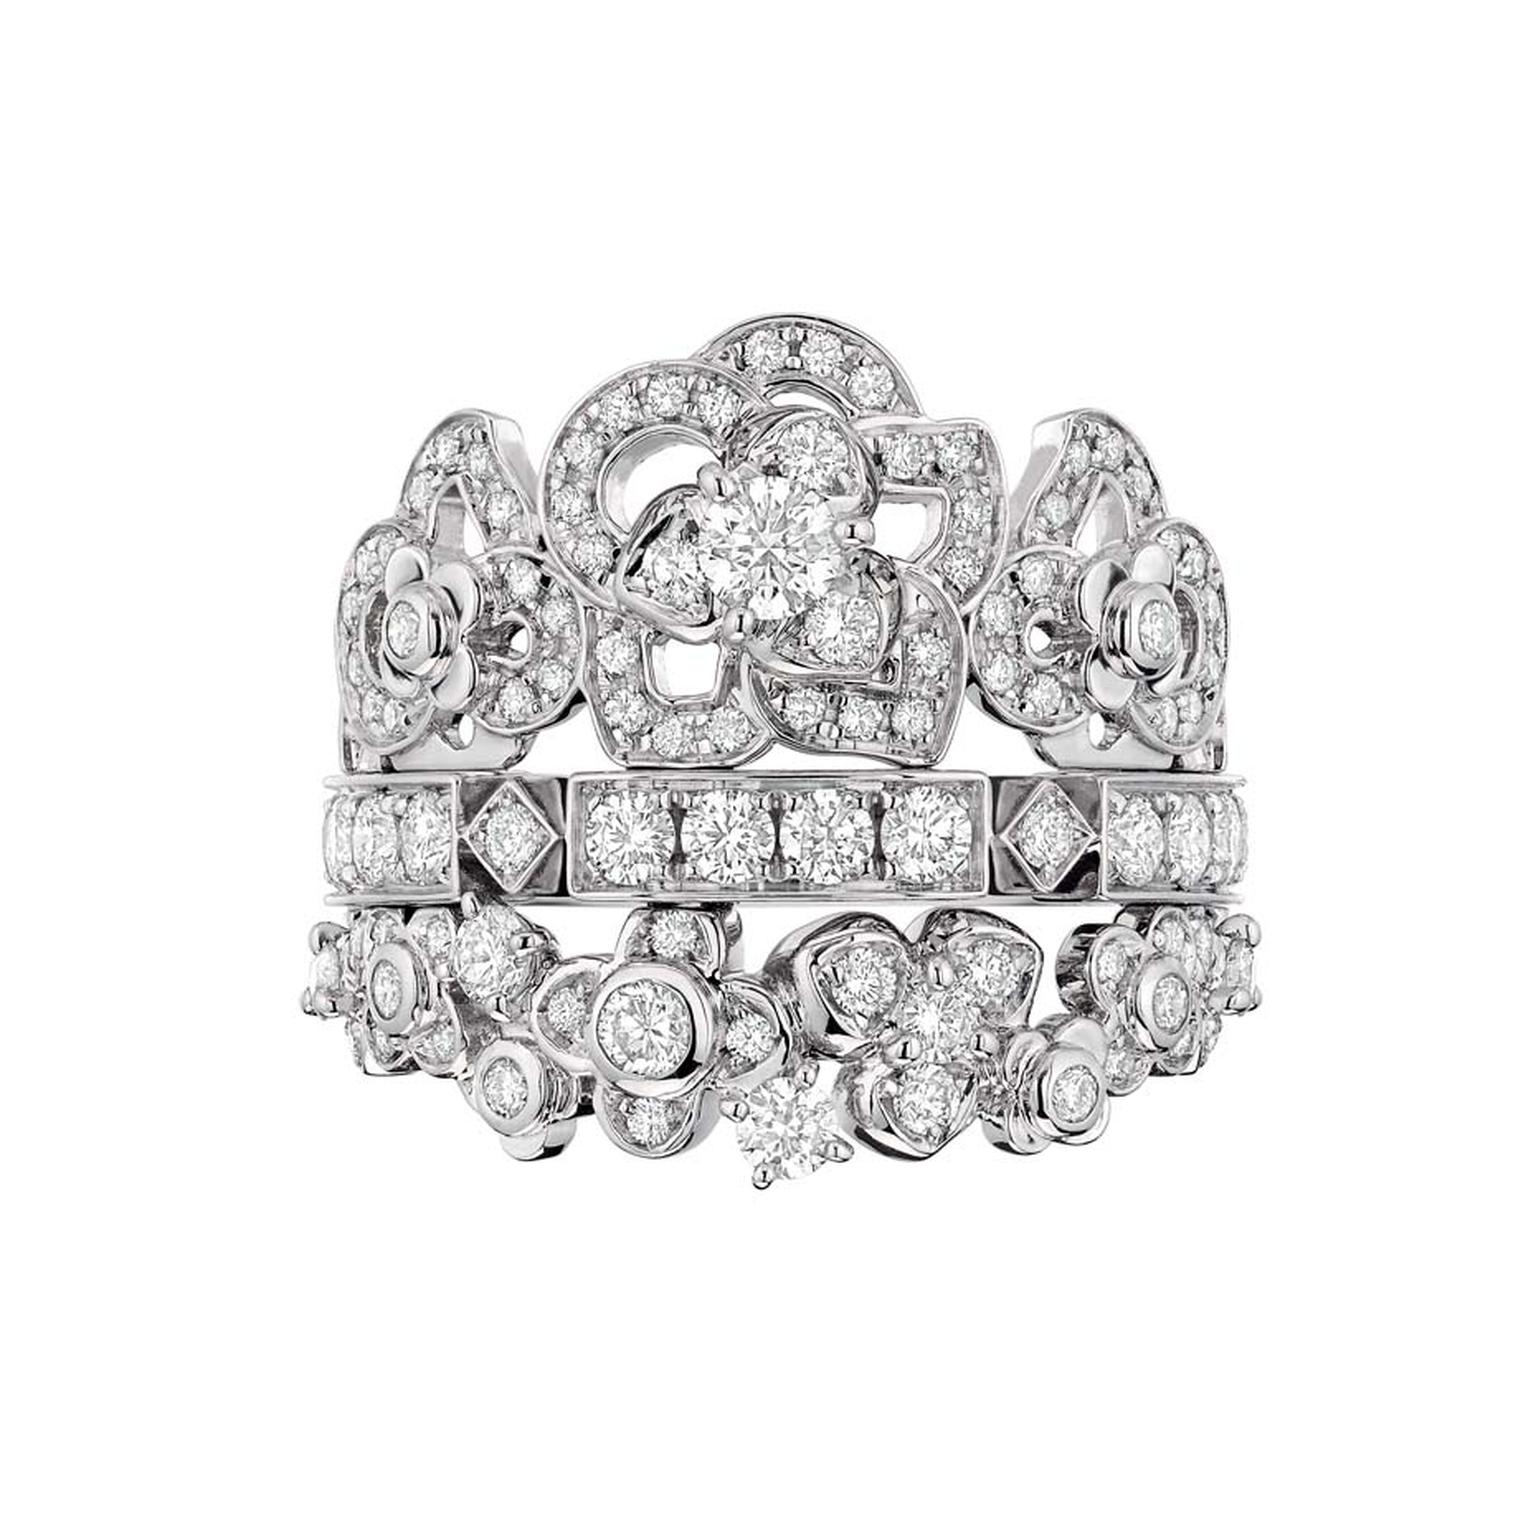 Chaumet Hortensia ring in white gold, set with 114 brilliant-cut diamonds.